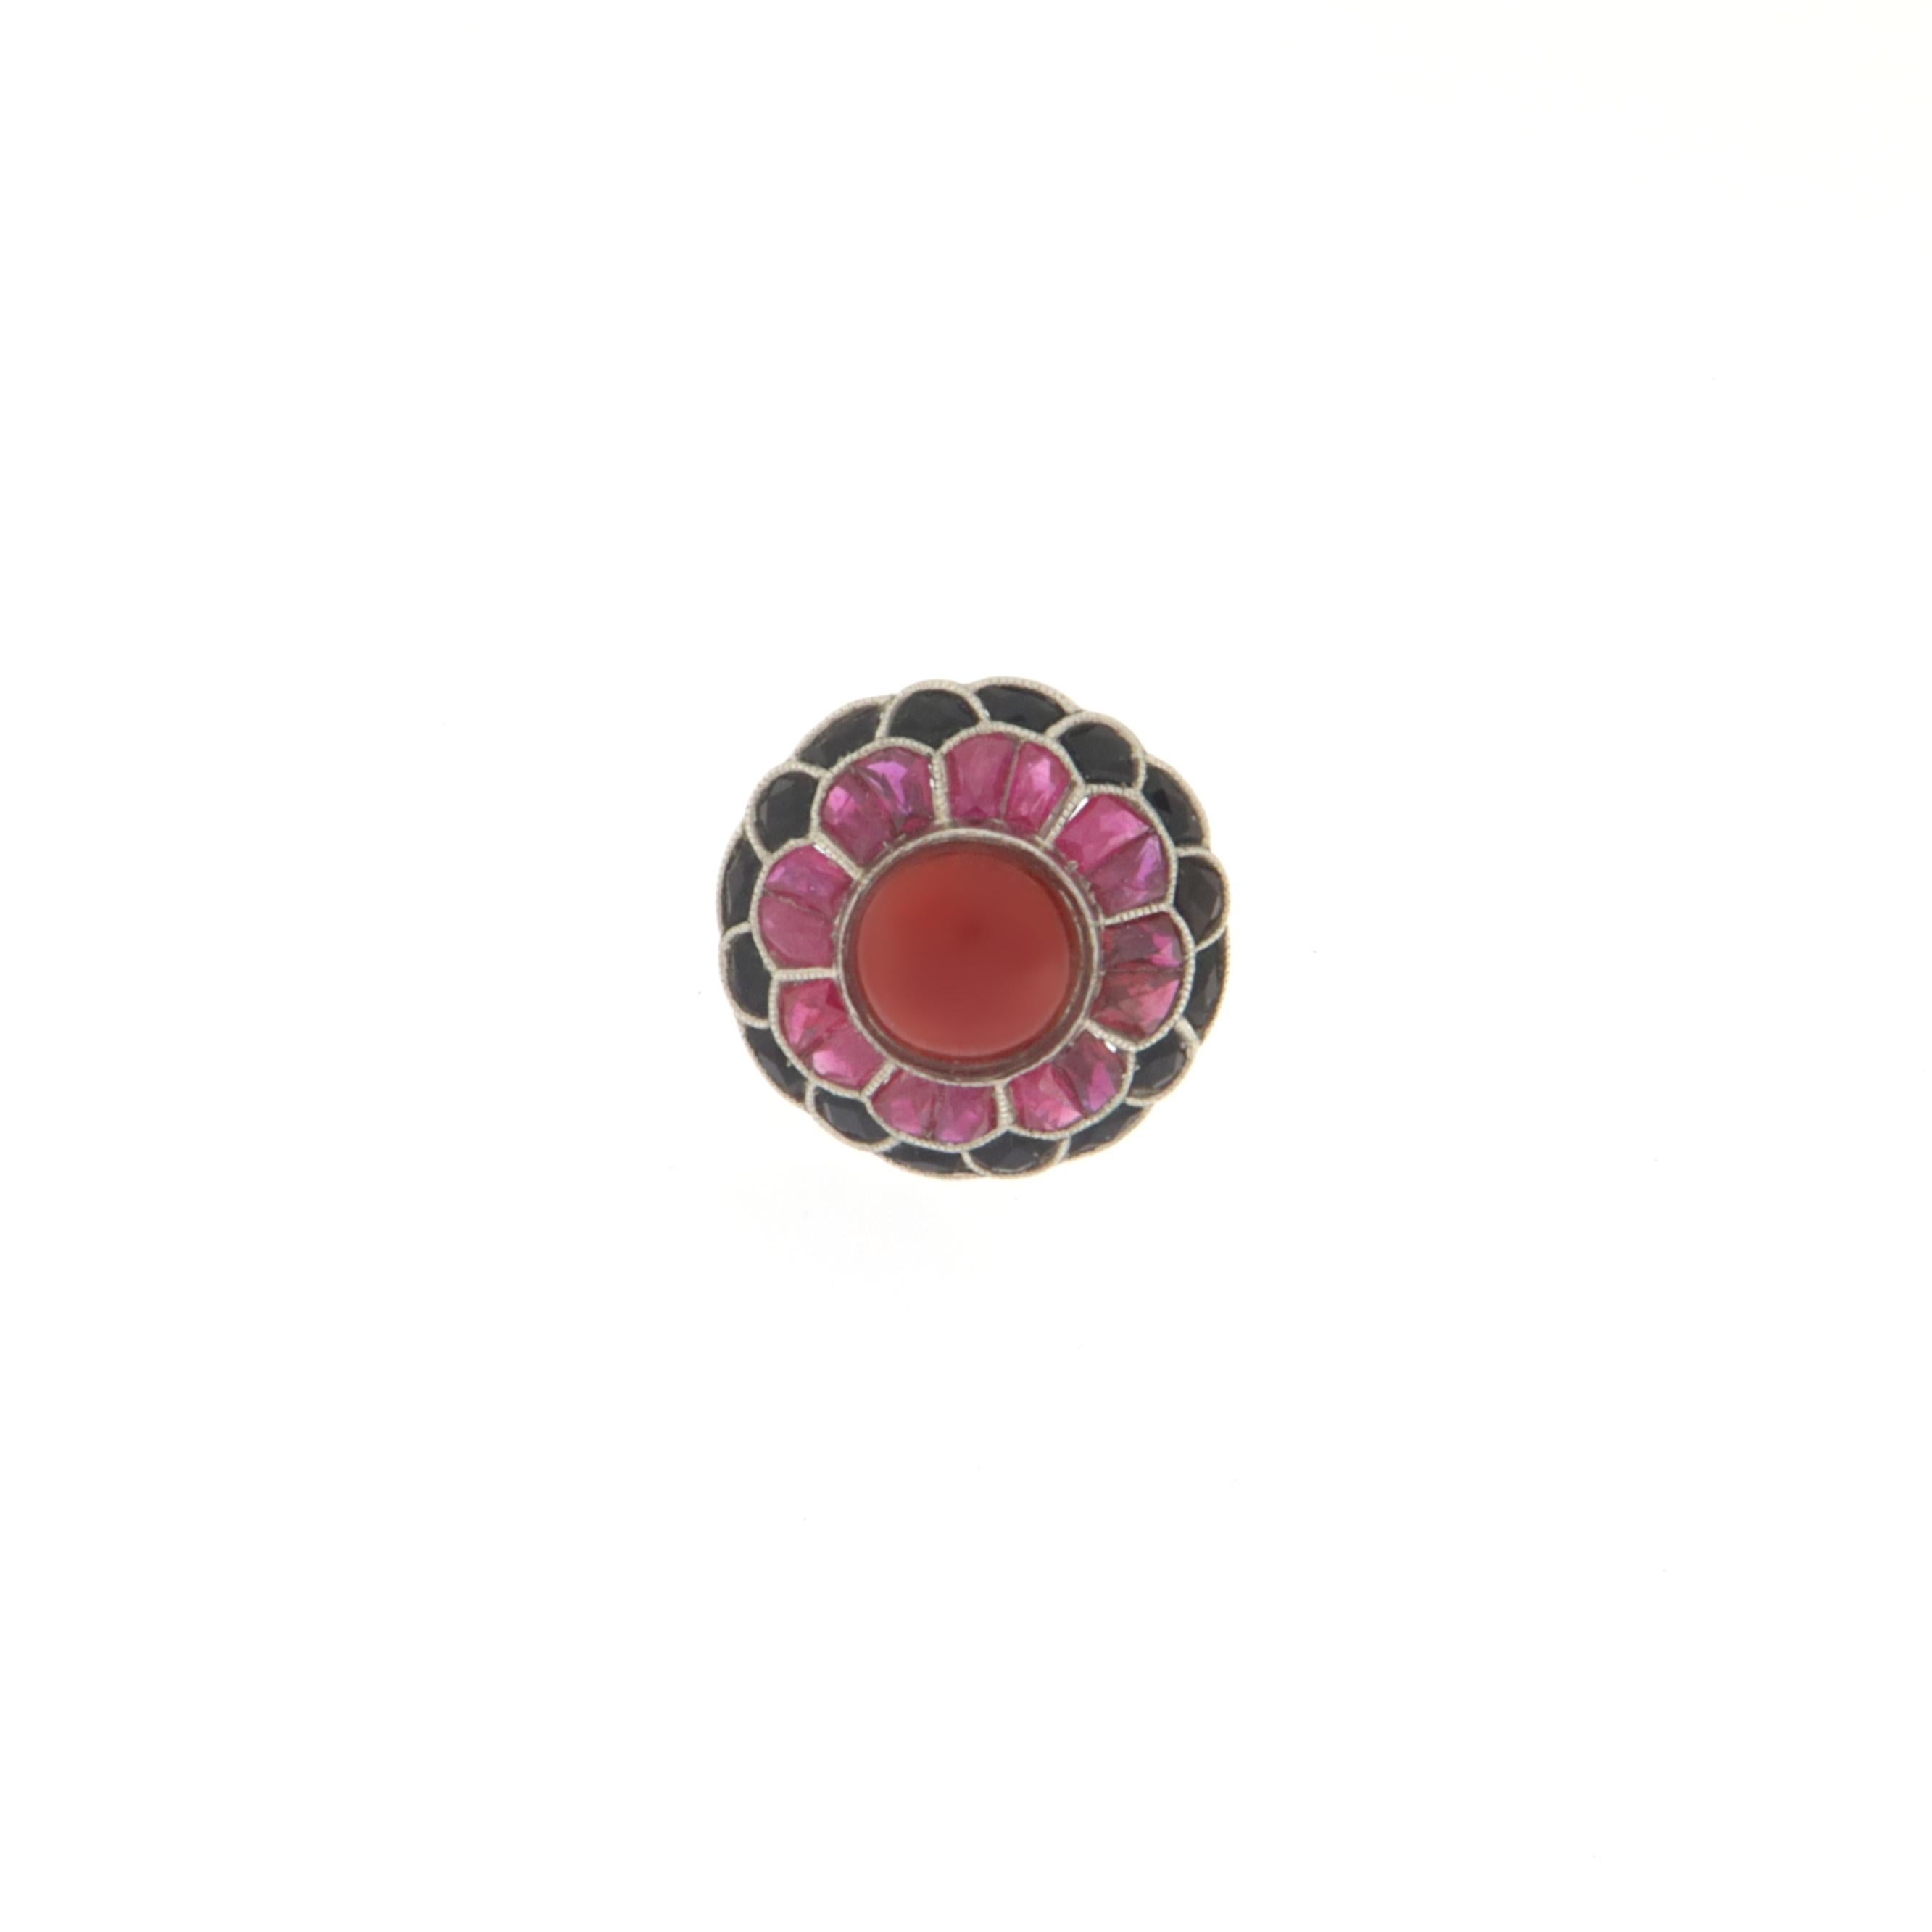 Fantastic platinum cocktail ring.Handmade by artisans assembled with coral,rubies,onyx and diamonds

Ring total weight 7.30 grams
Rubies weight 1.15 karat
Diamonds weight 0.27 karat
Ring size 7.5 us
(all rings are can be resized)


